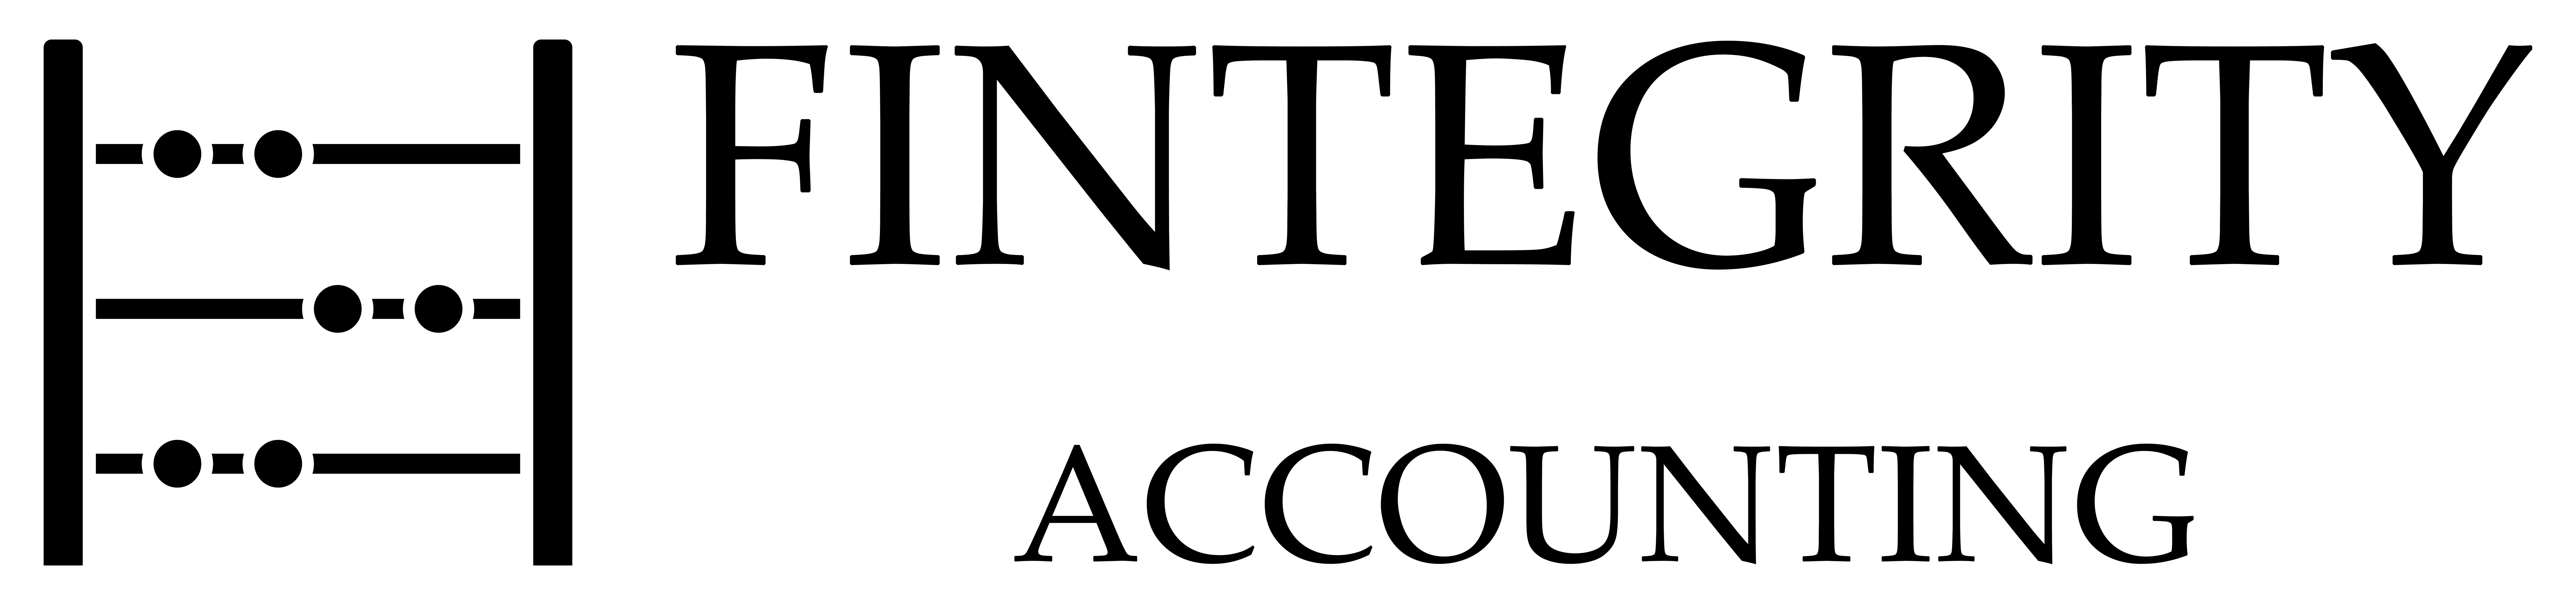 Fintegrity Accounting